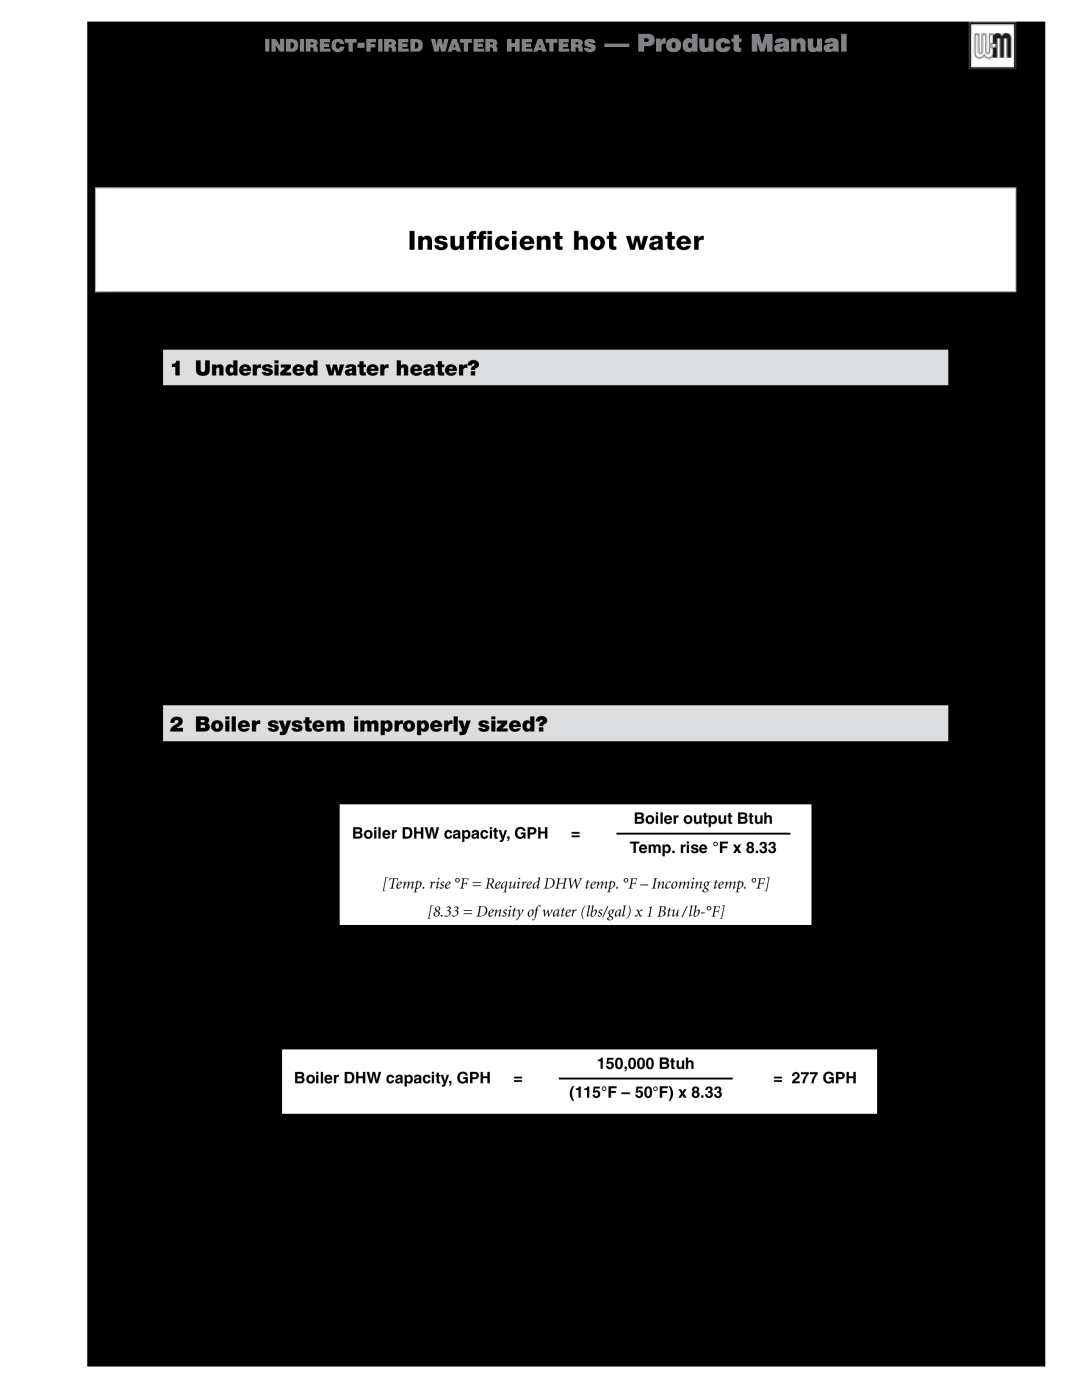 Weil-McLain GL-E223-ADOC 0311 manual Insufficient hot water, 1Undersized water heater?, 2Boiler system improperly sized? 